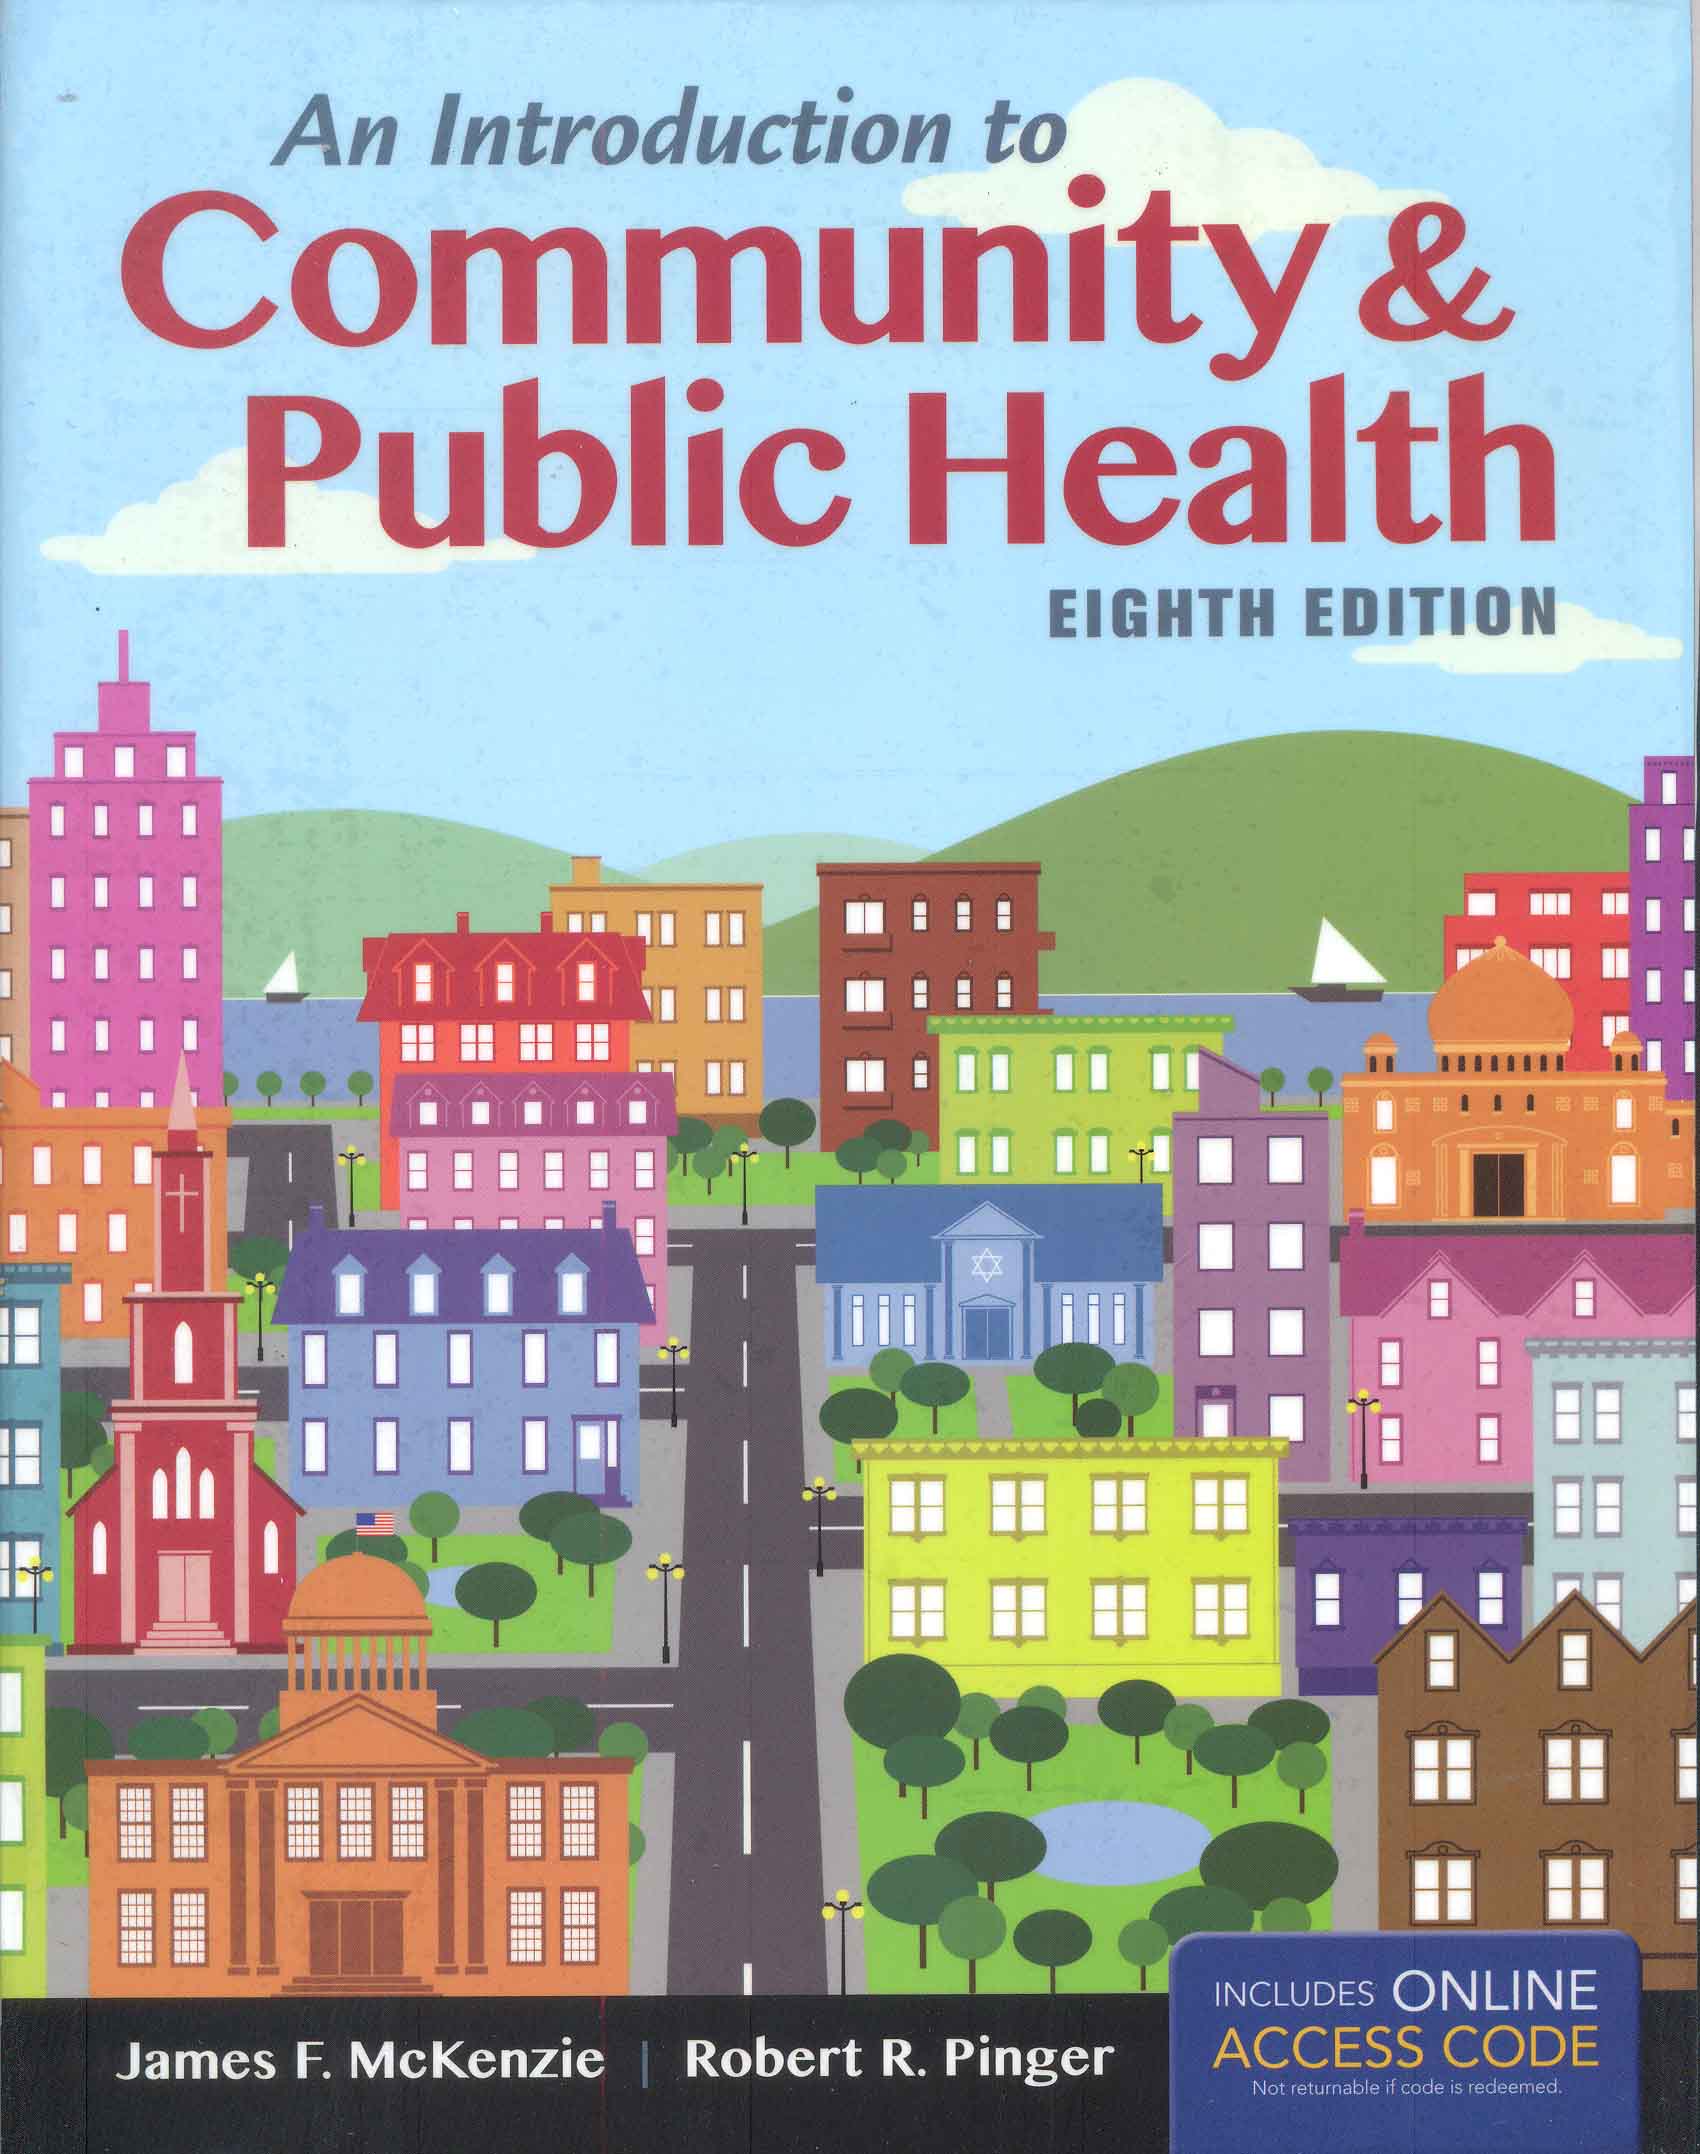 An introduction to community & public health